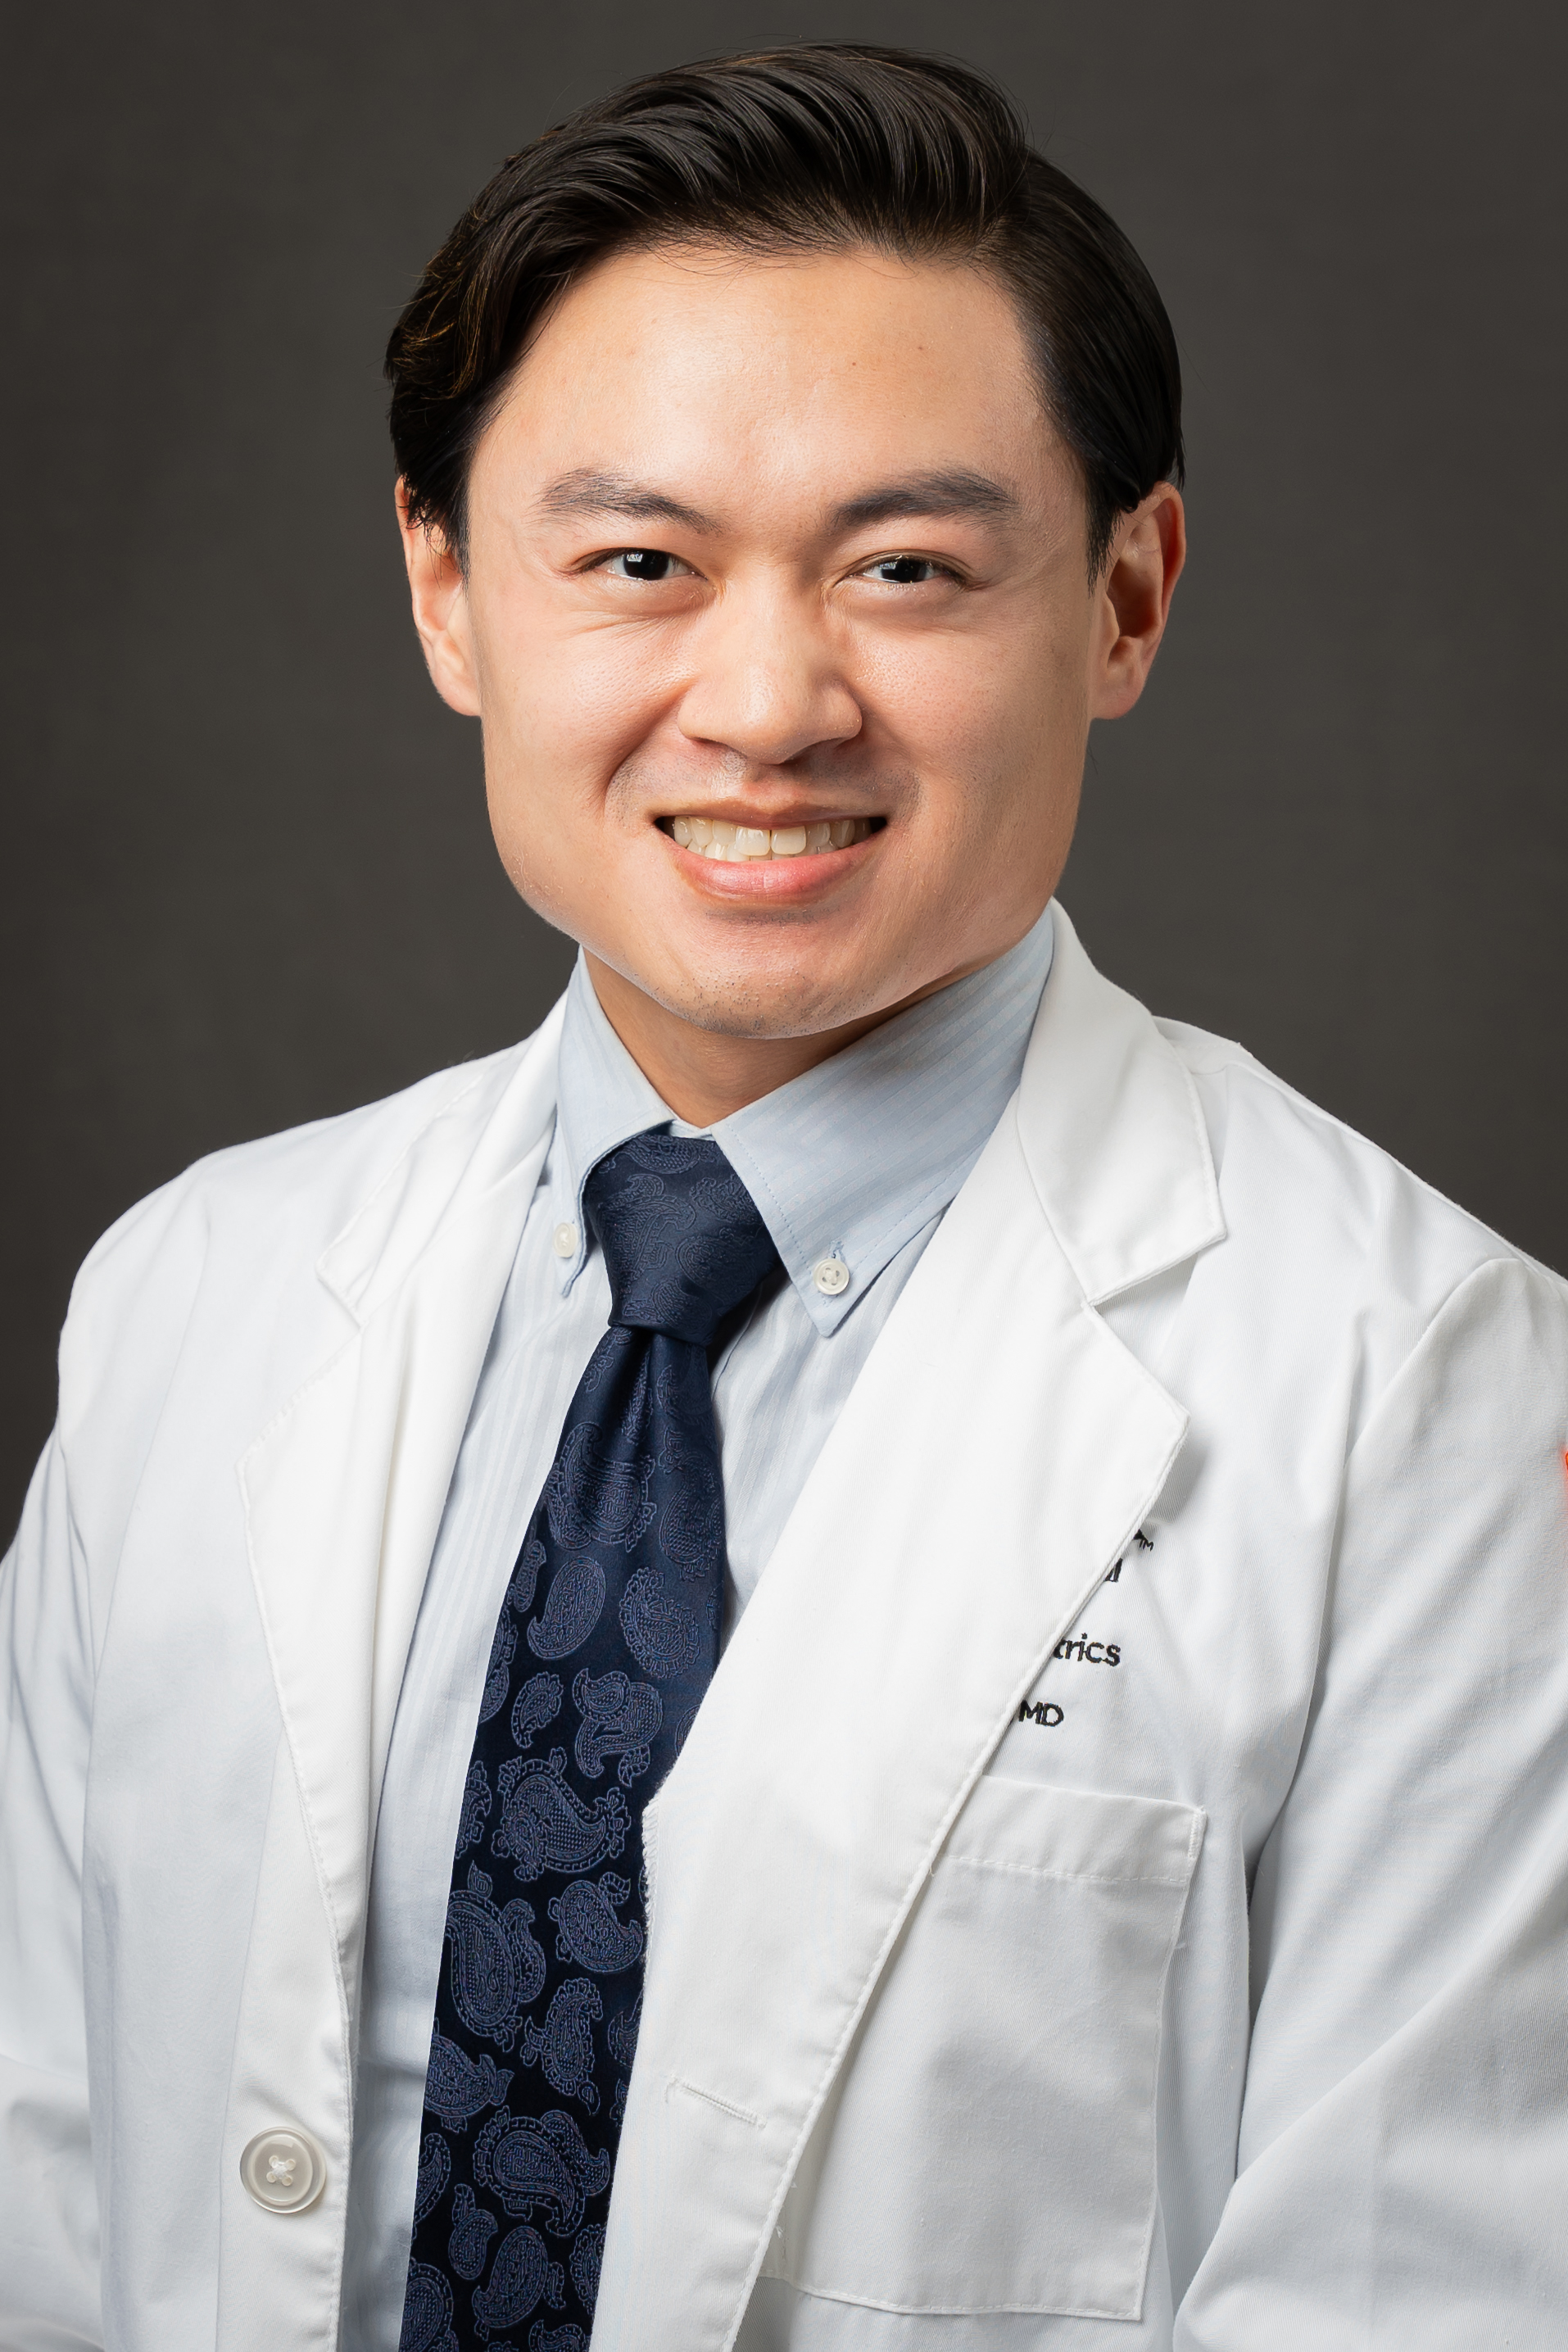 kevin kuo is seated wearing a tie, blue shirt, and white lab coat while smiling for the camera.